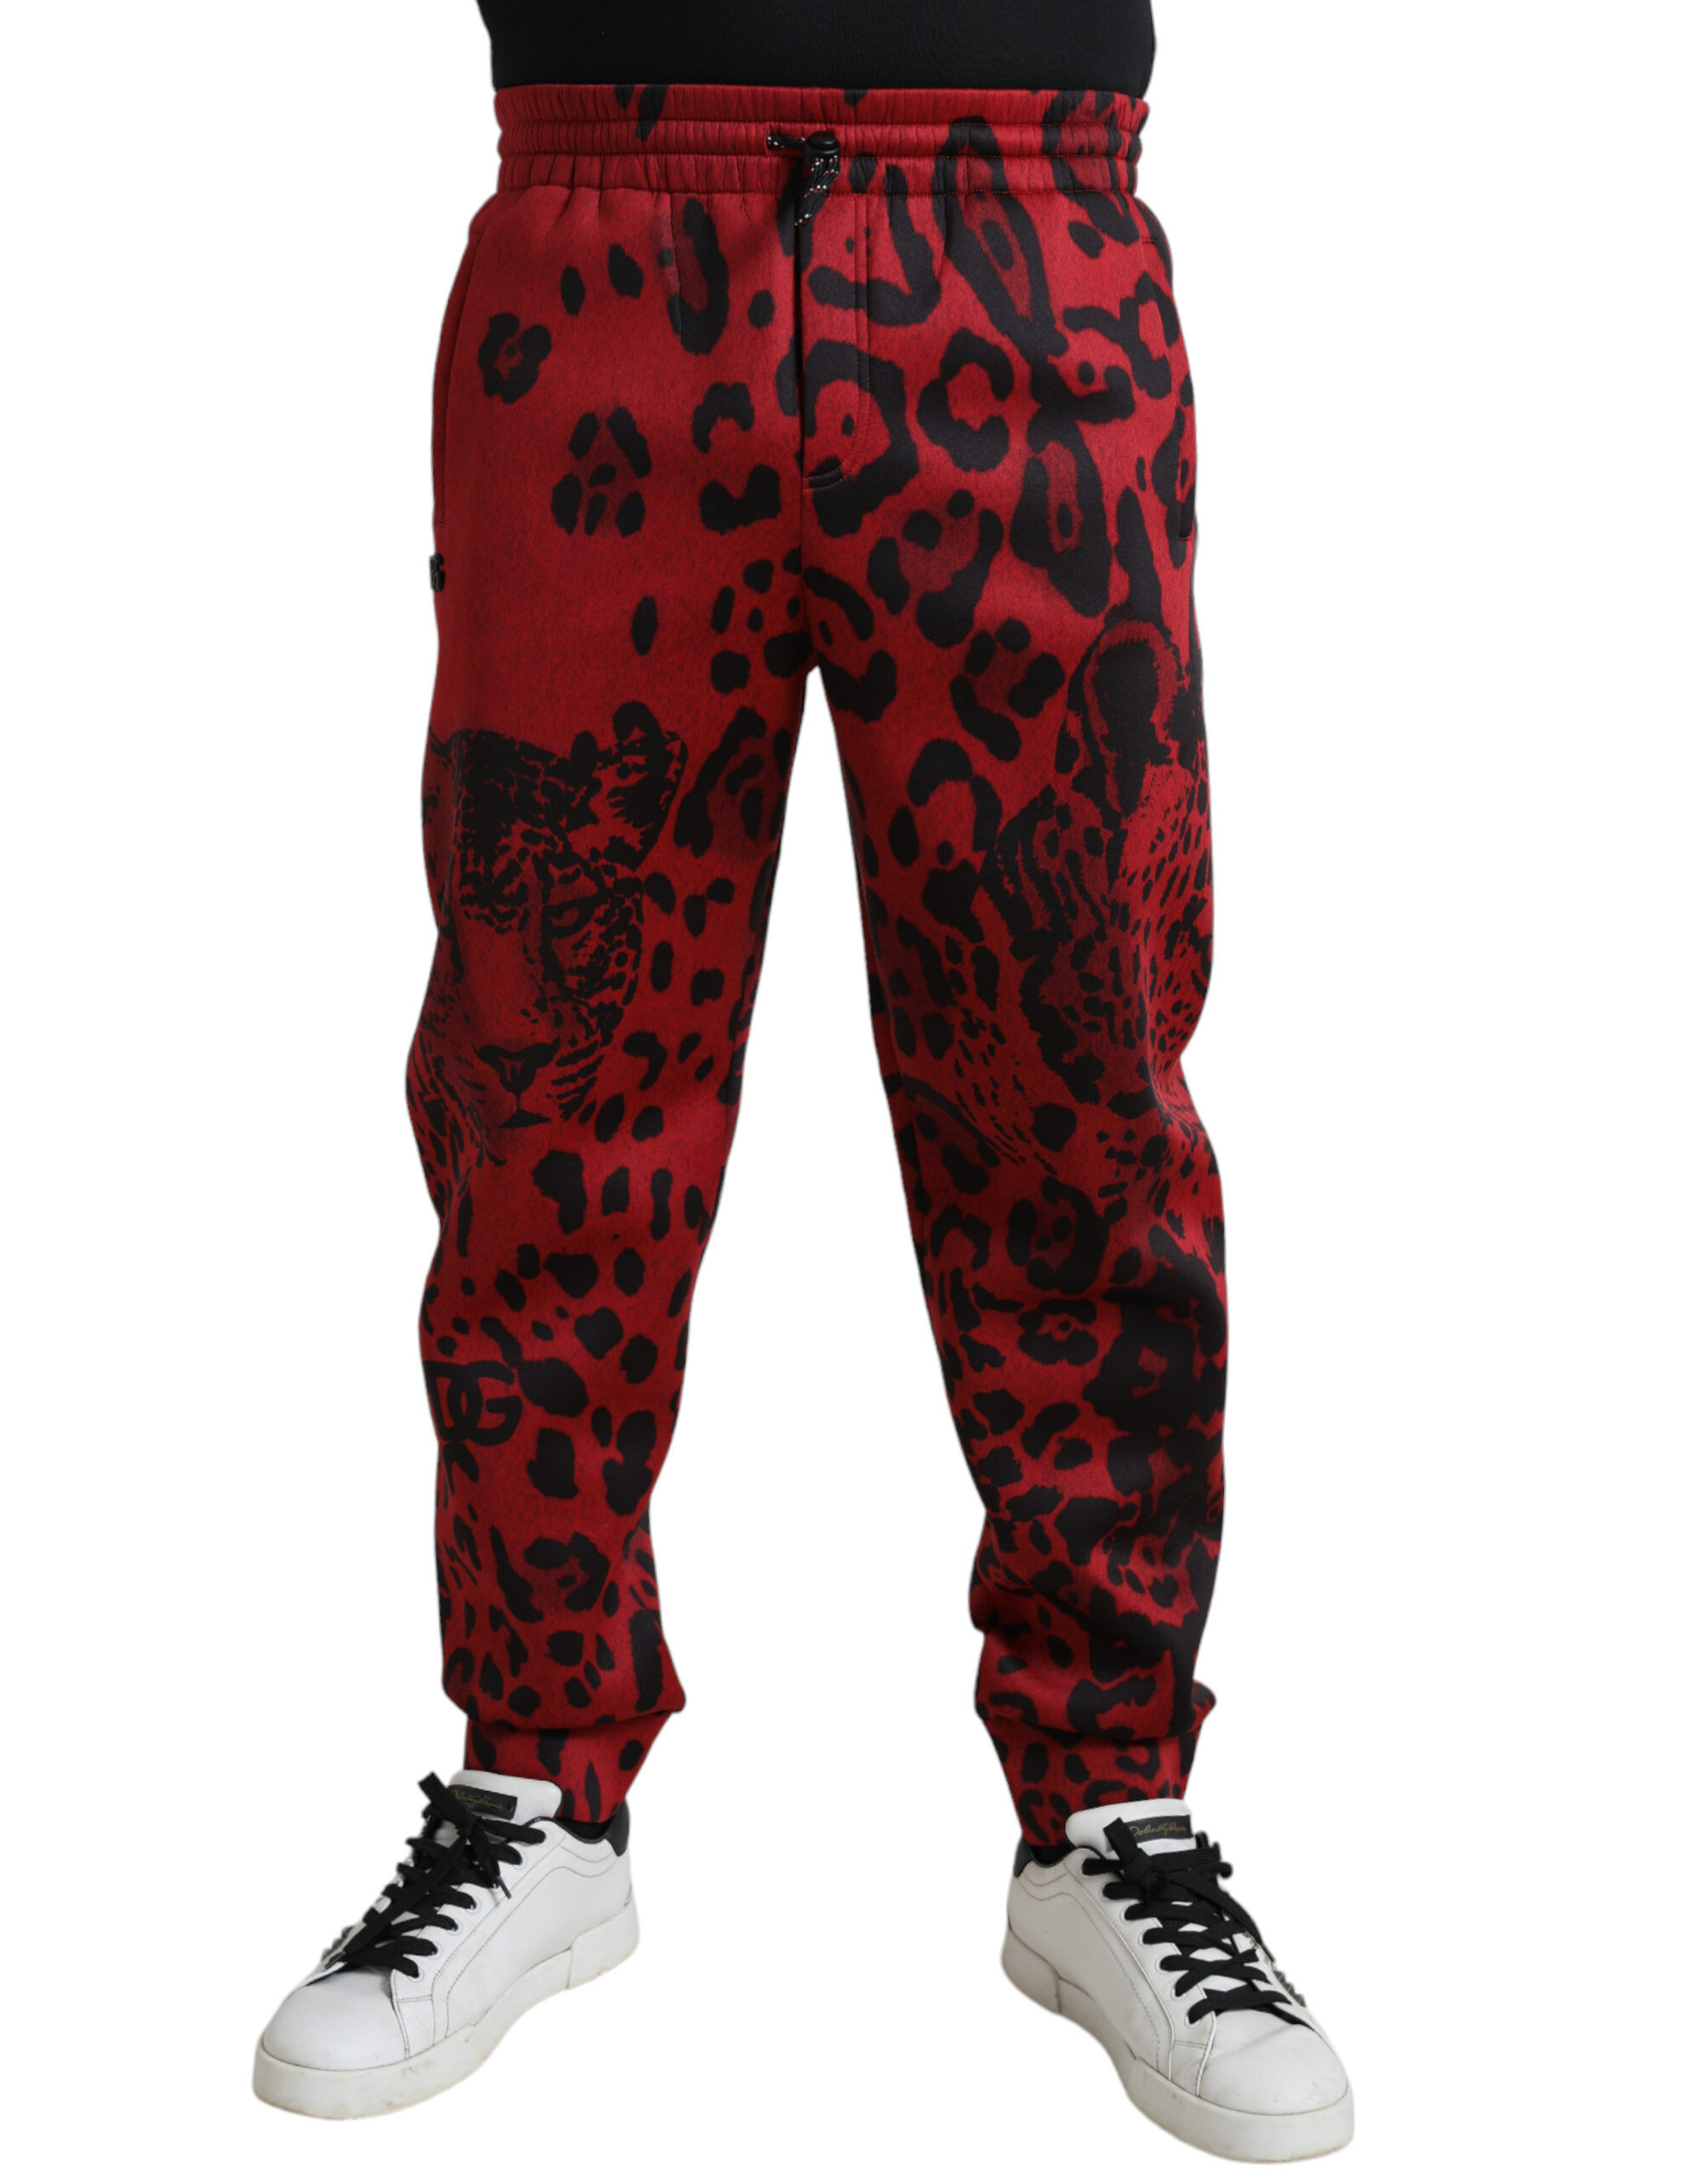 Black and Red Dolce & Gabbana Red Black Leopard Stretch Jogger Pants